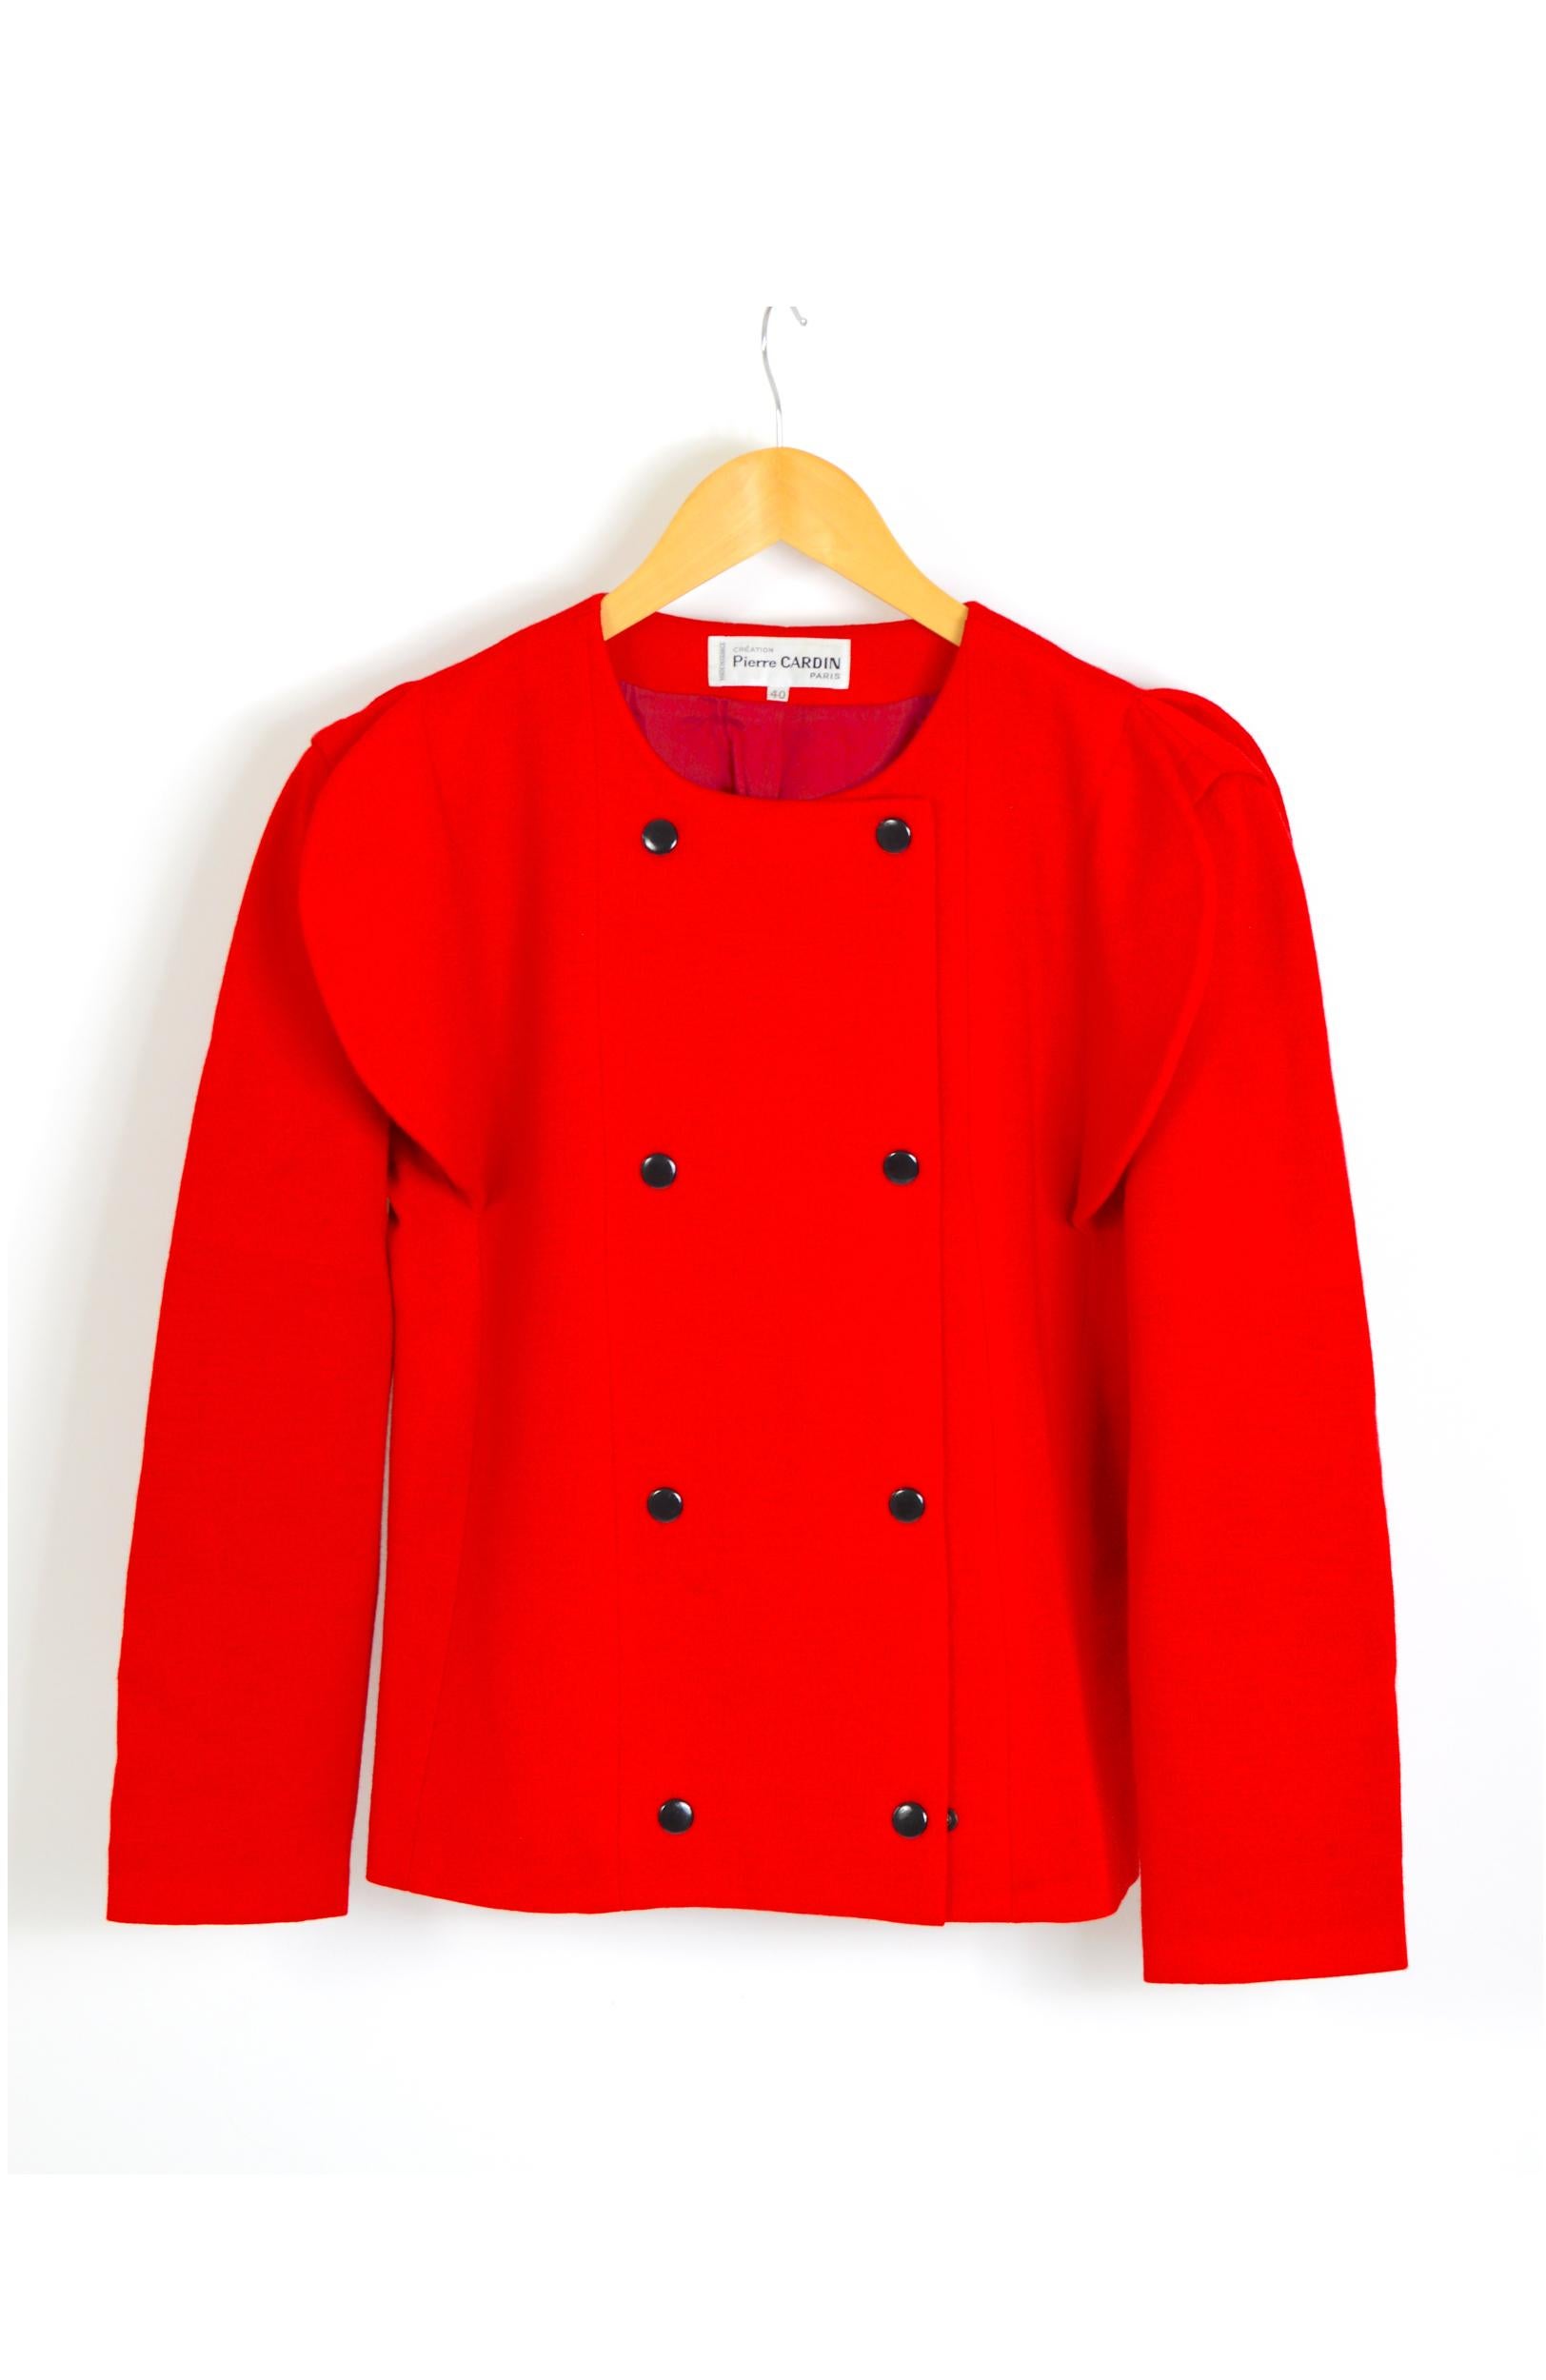 Pierre Cardin vintage 1993 scalloped-edge red wool mix jacket  For Sale 2